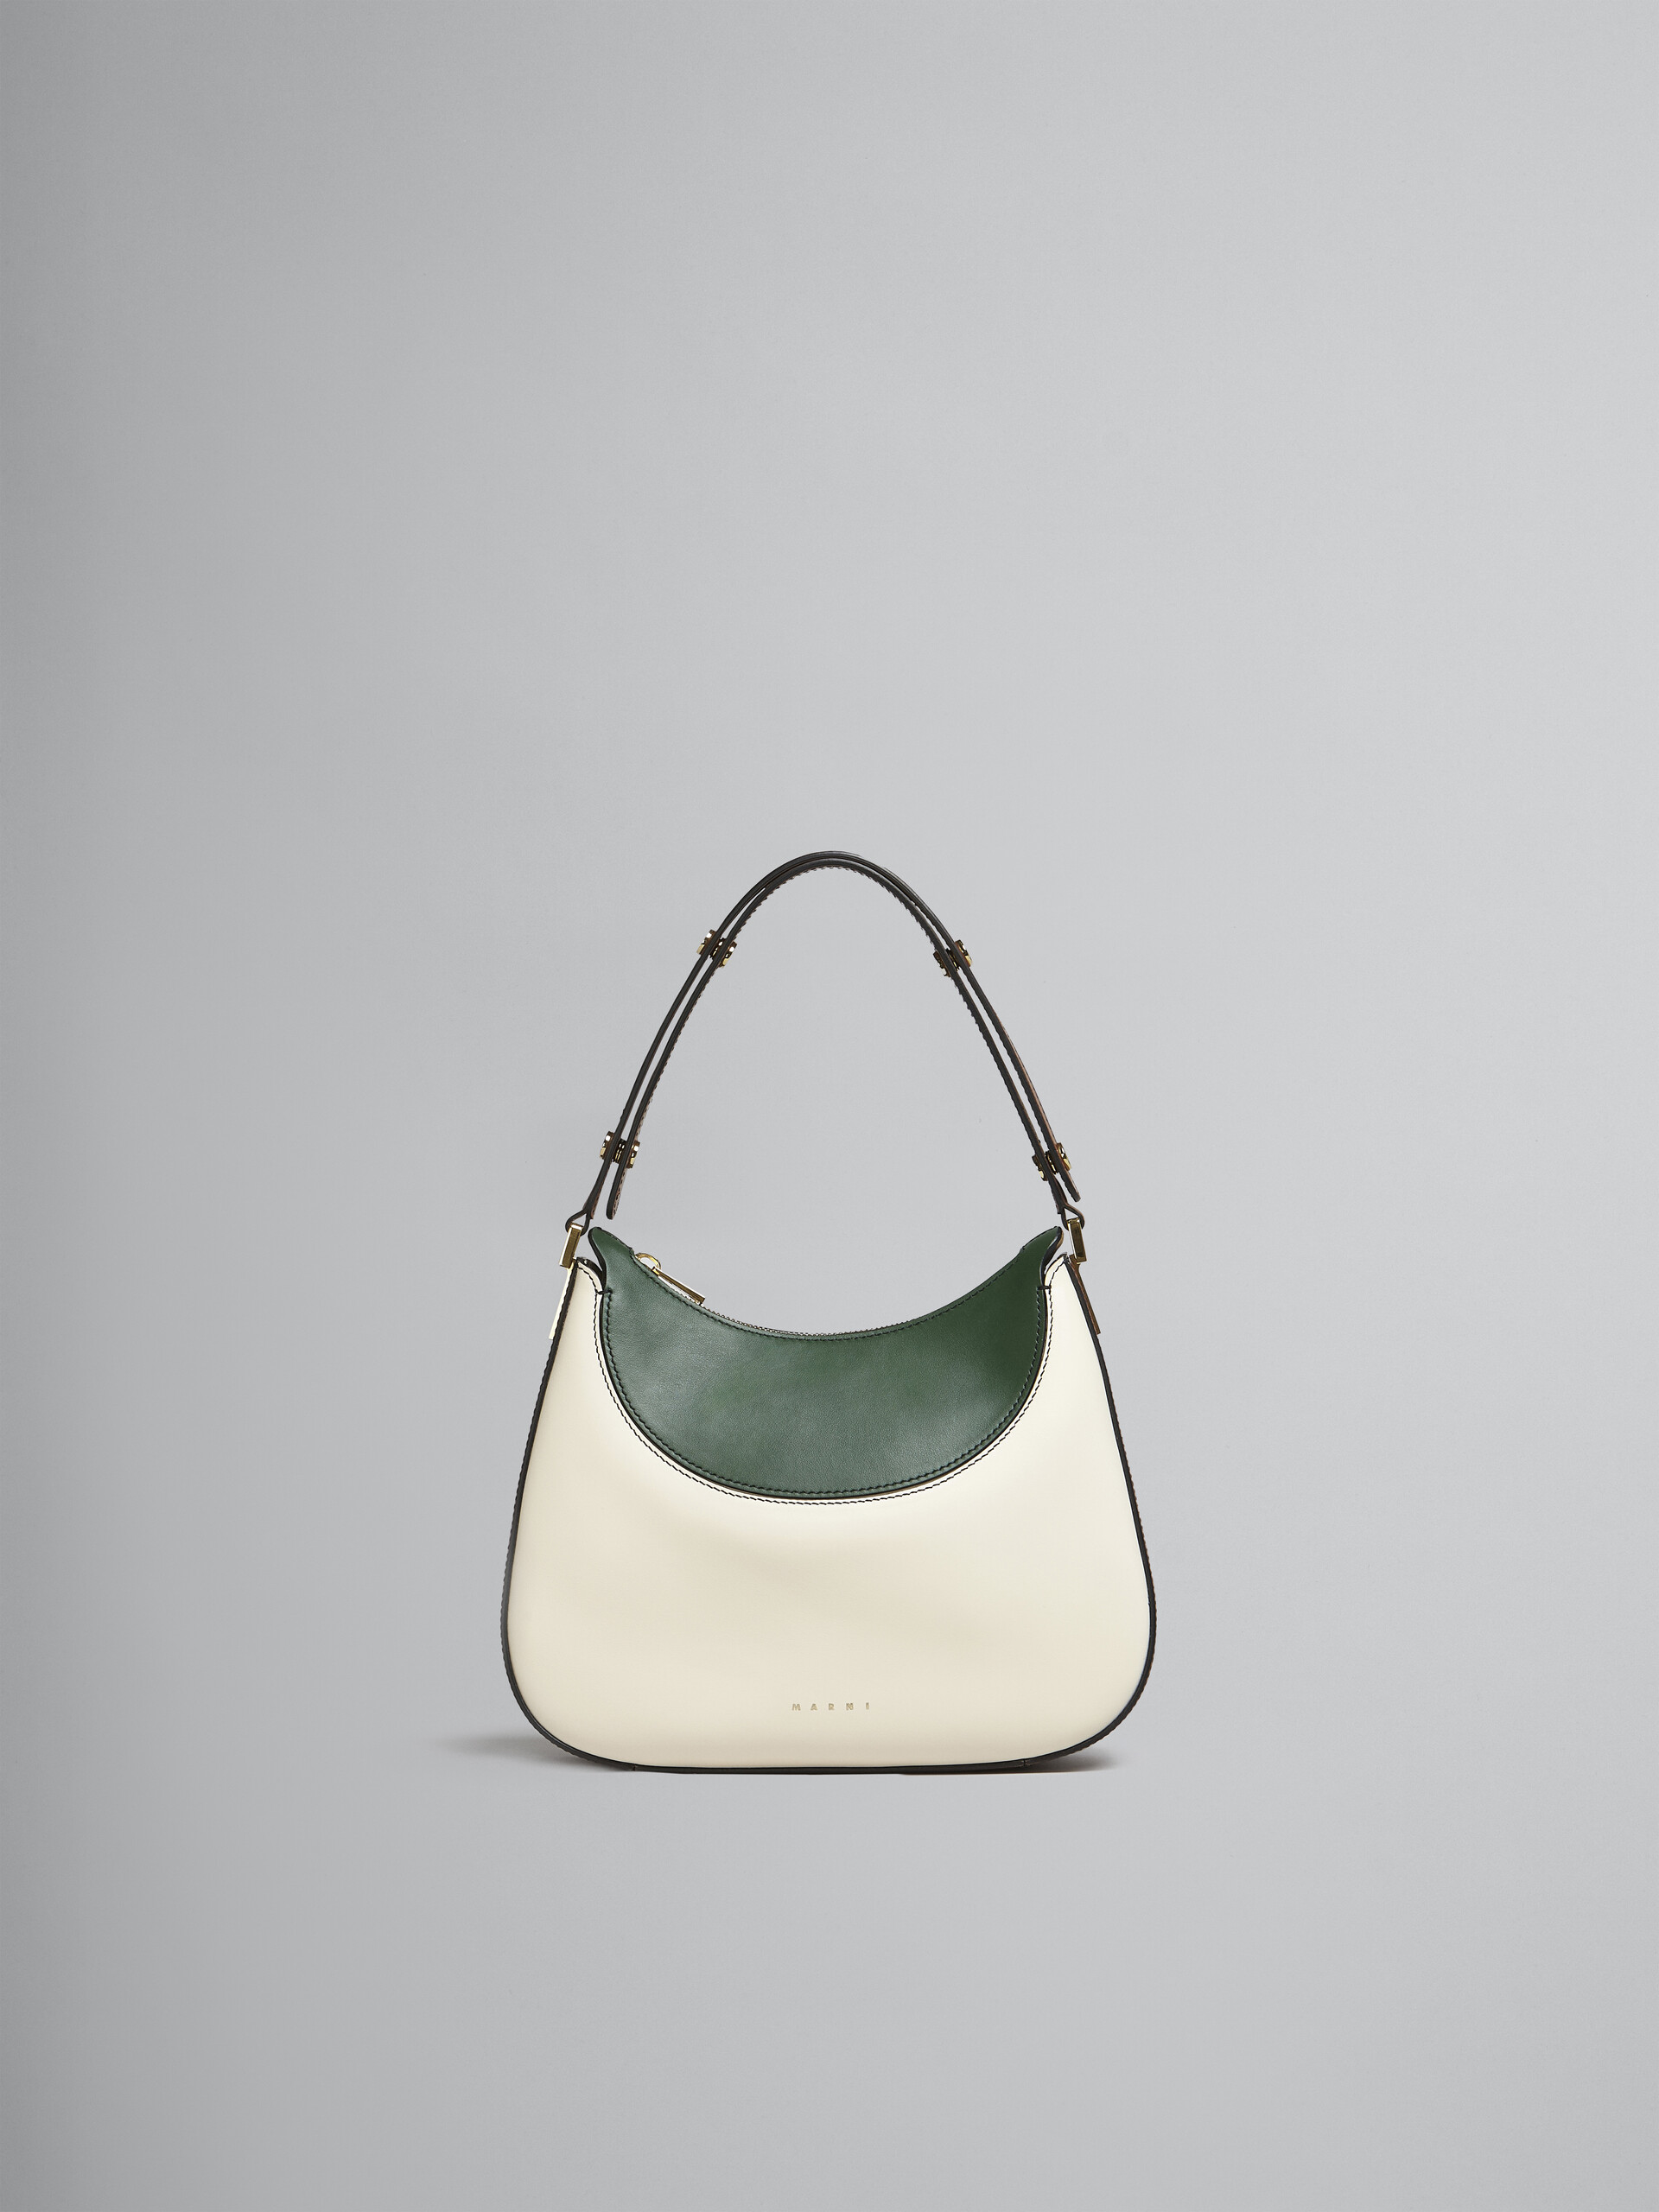 Milano small bag in white brown and green leather - Handbag - Image 1